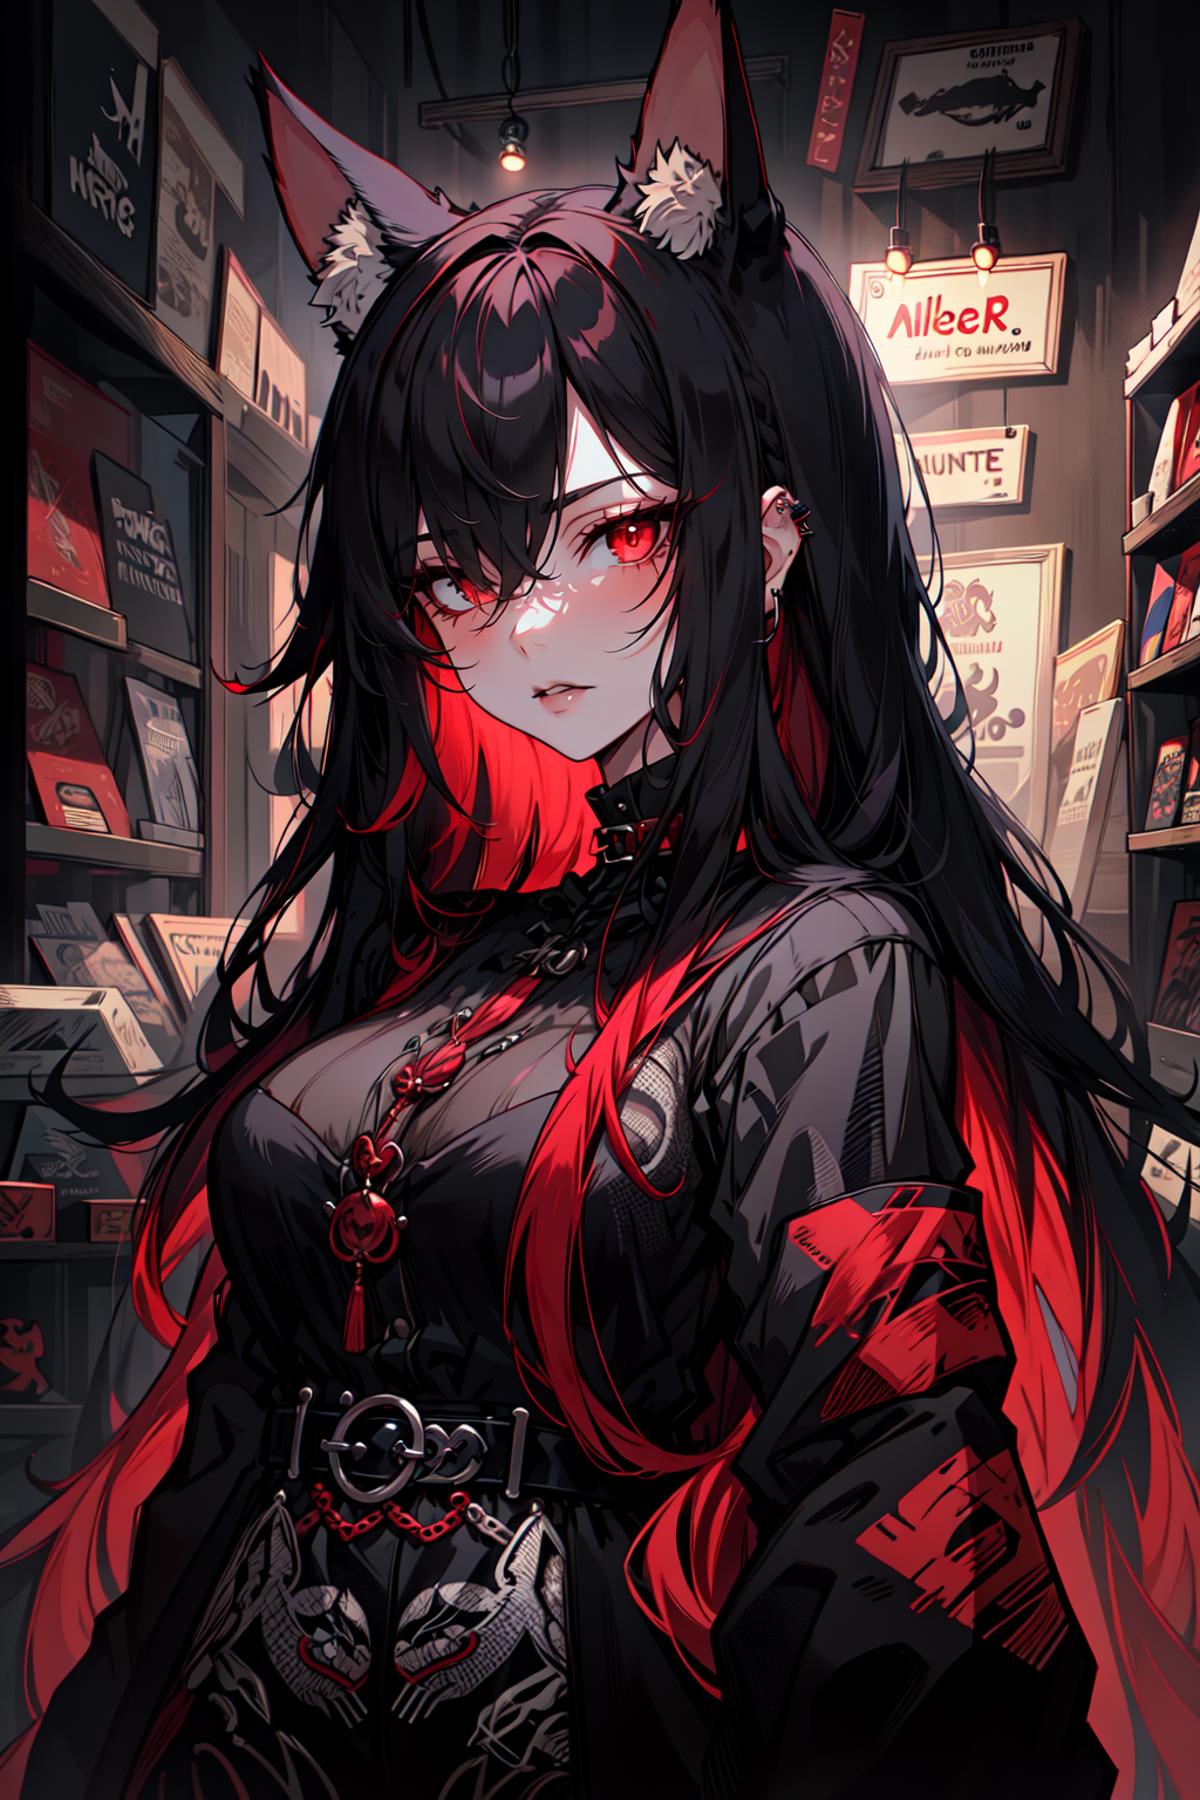 A black and red anime character with red hair and red eyes standing in a library.